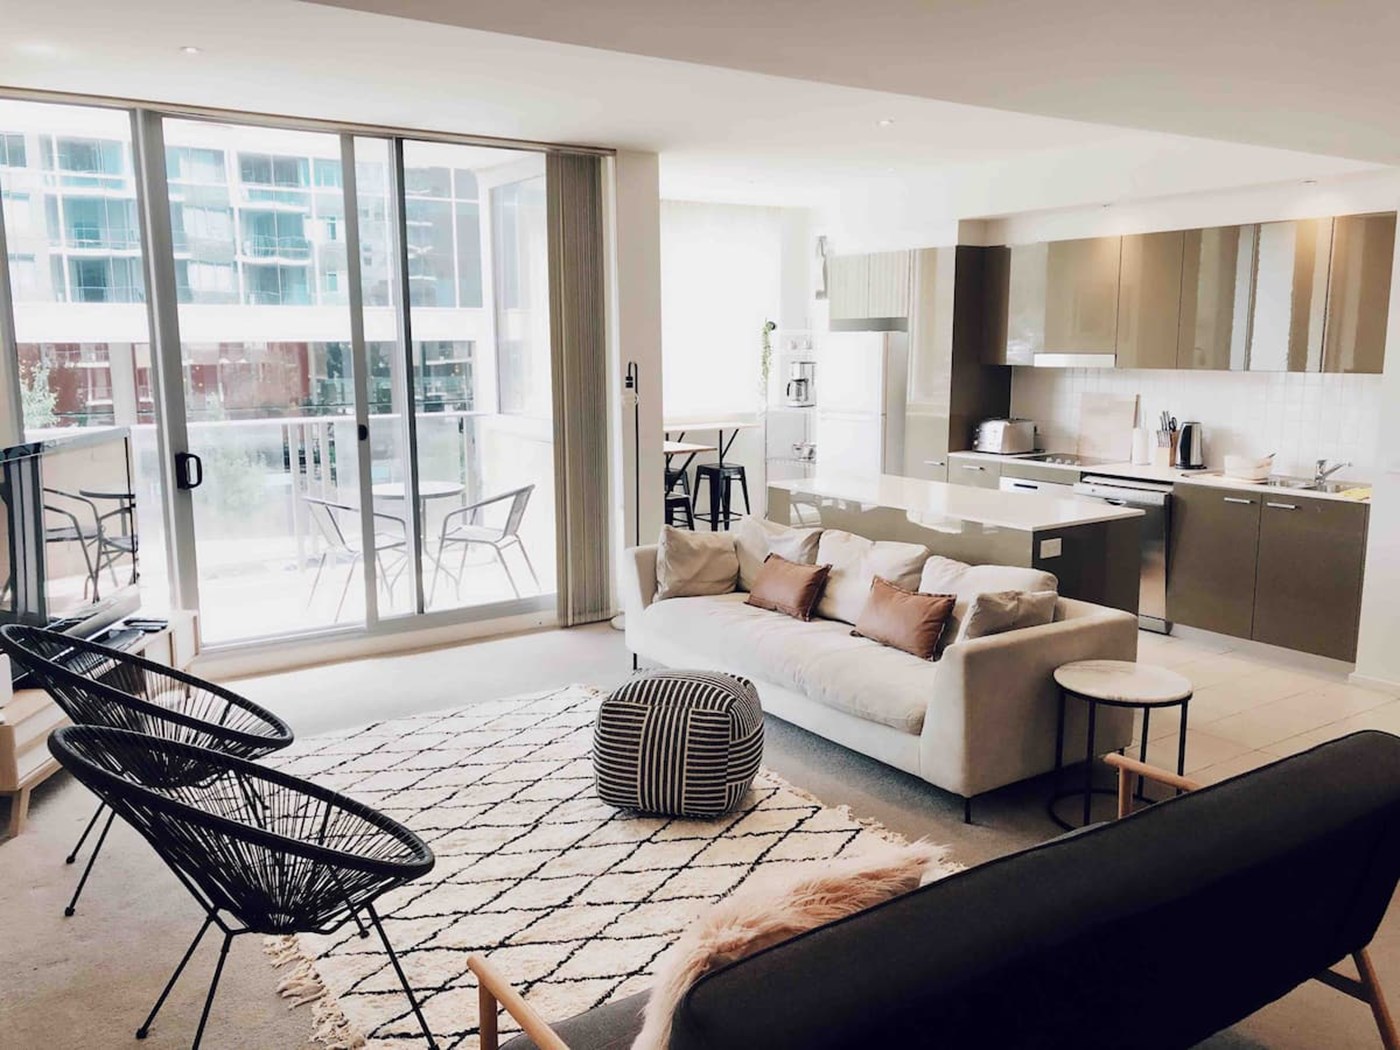 Canberra’s Most Popular 2 Bedroom Apartment via Airbnb